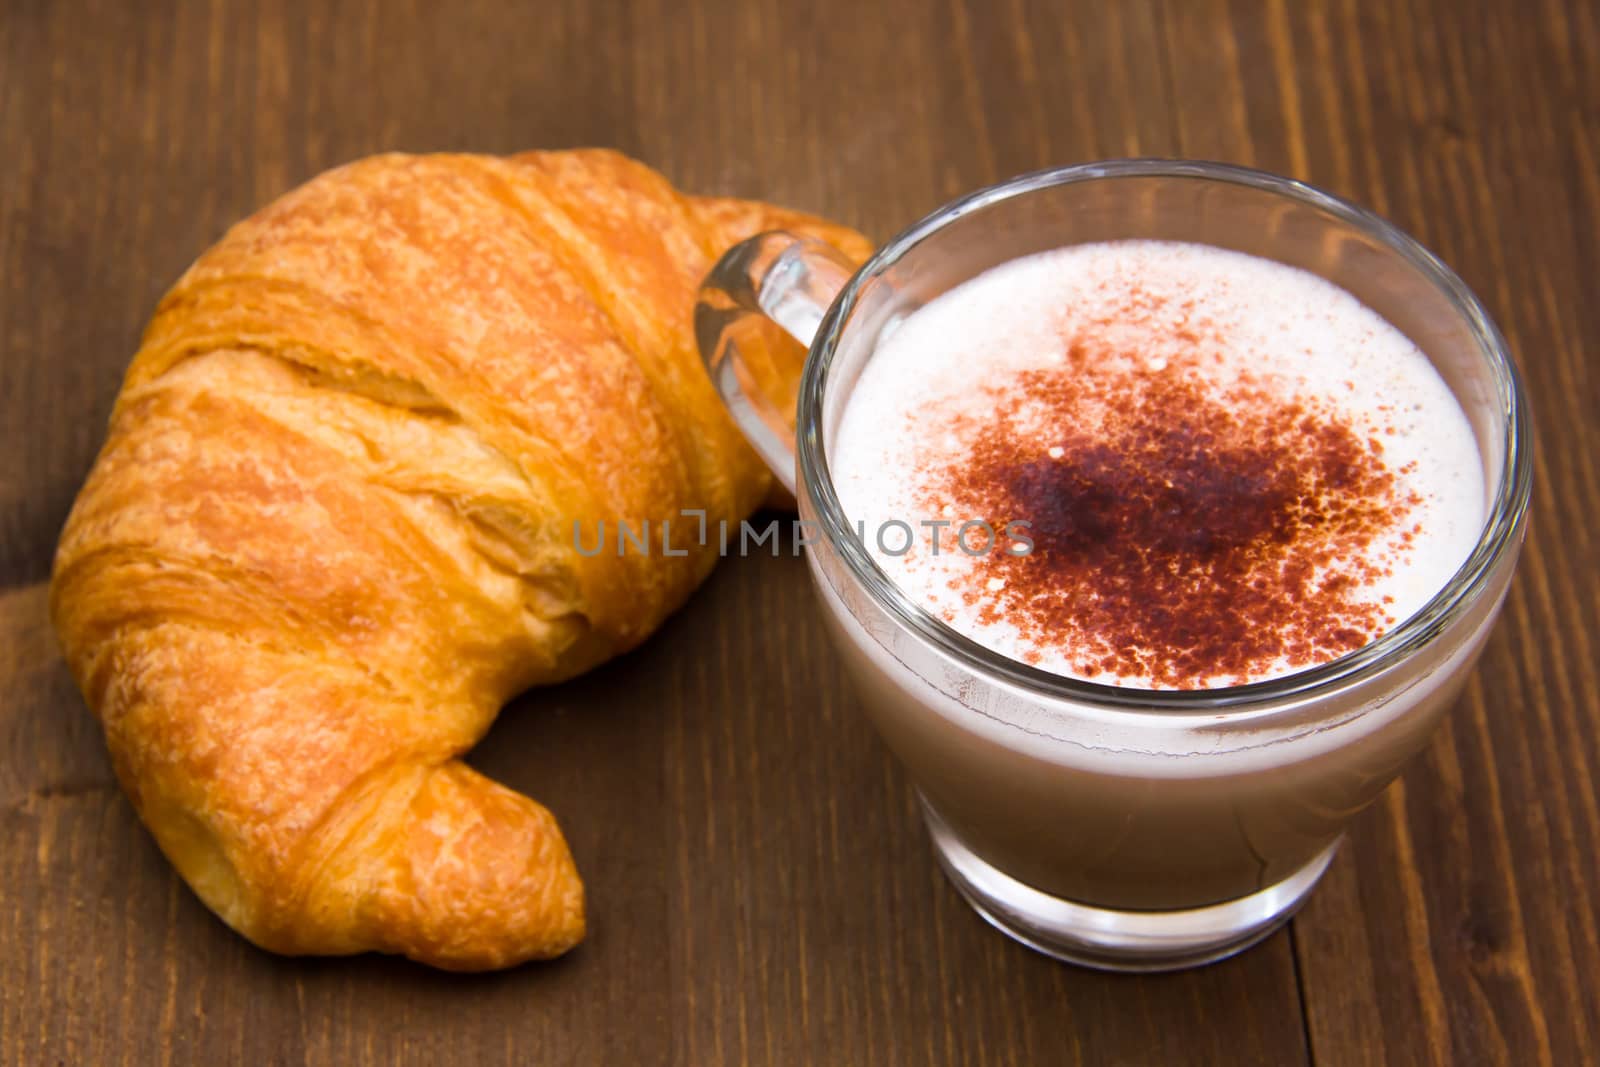 Cappuccino and croissant on wood by spafra